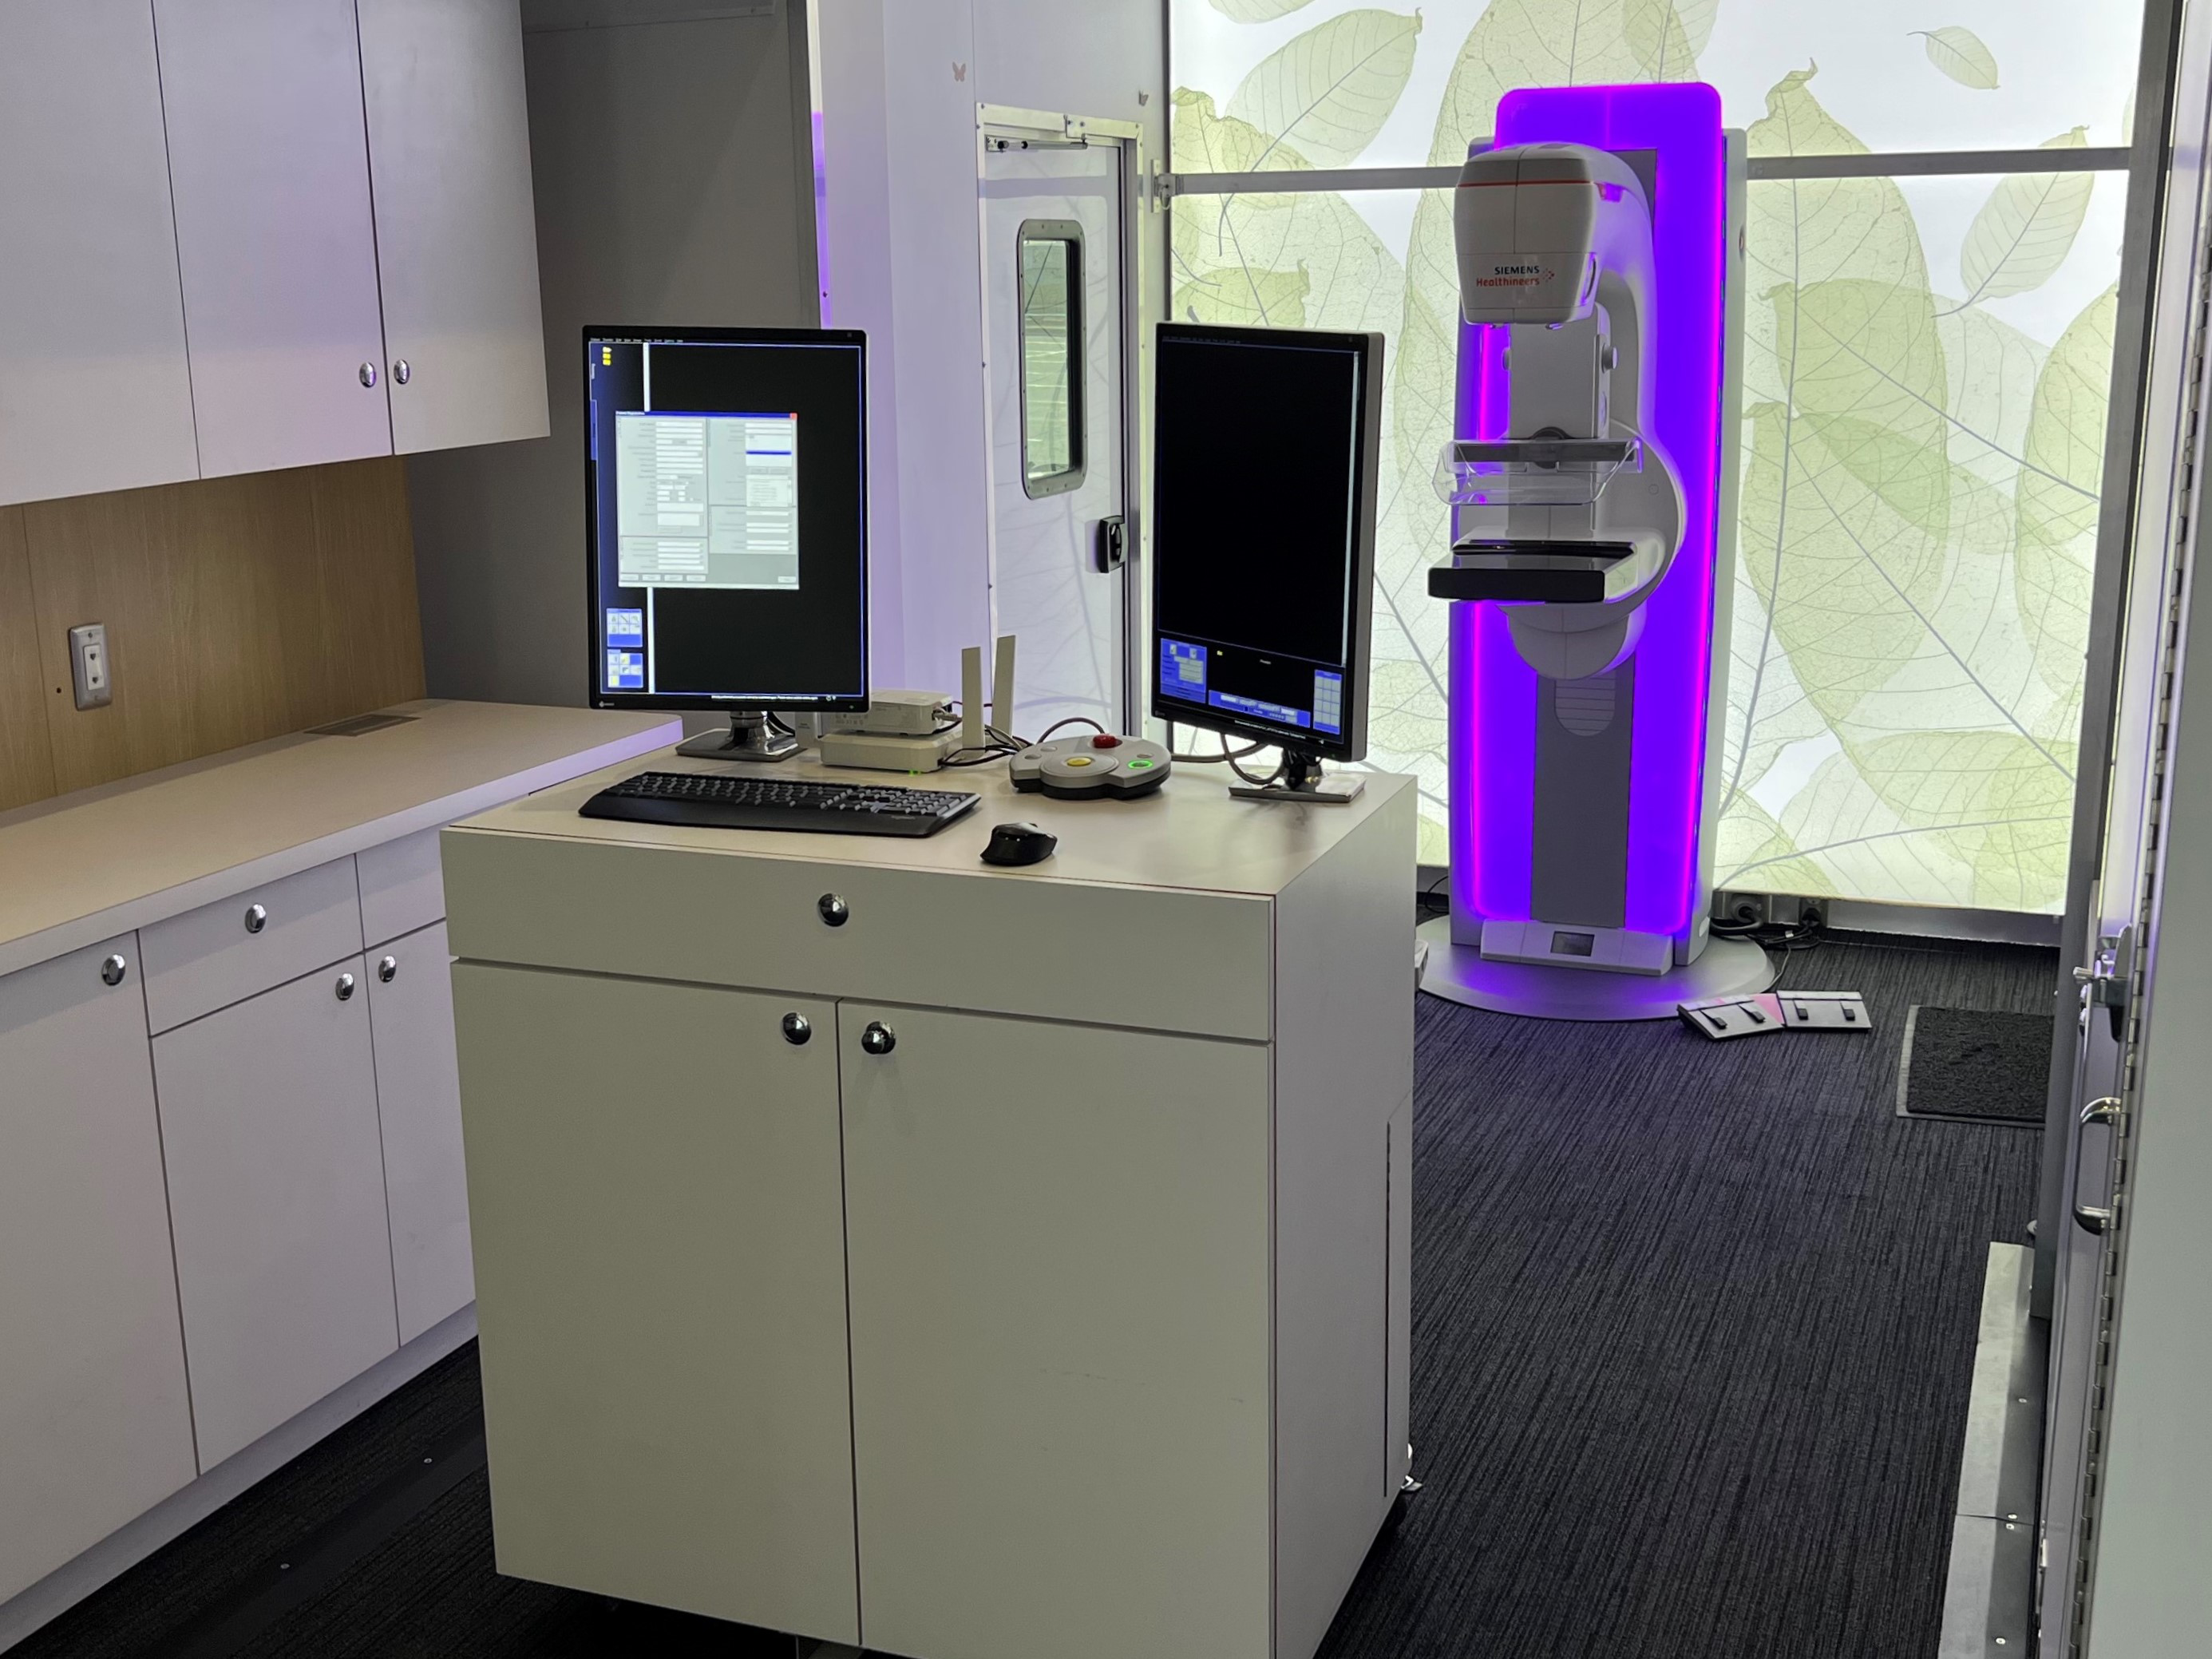 The mobile mammography service was equipped with the latest breast imaging technology. 